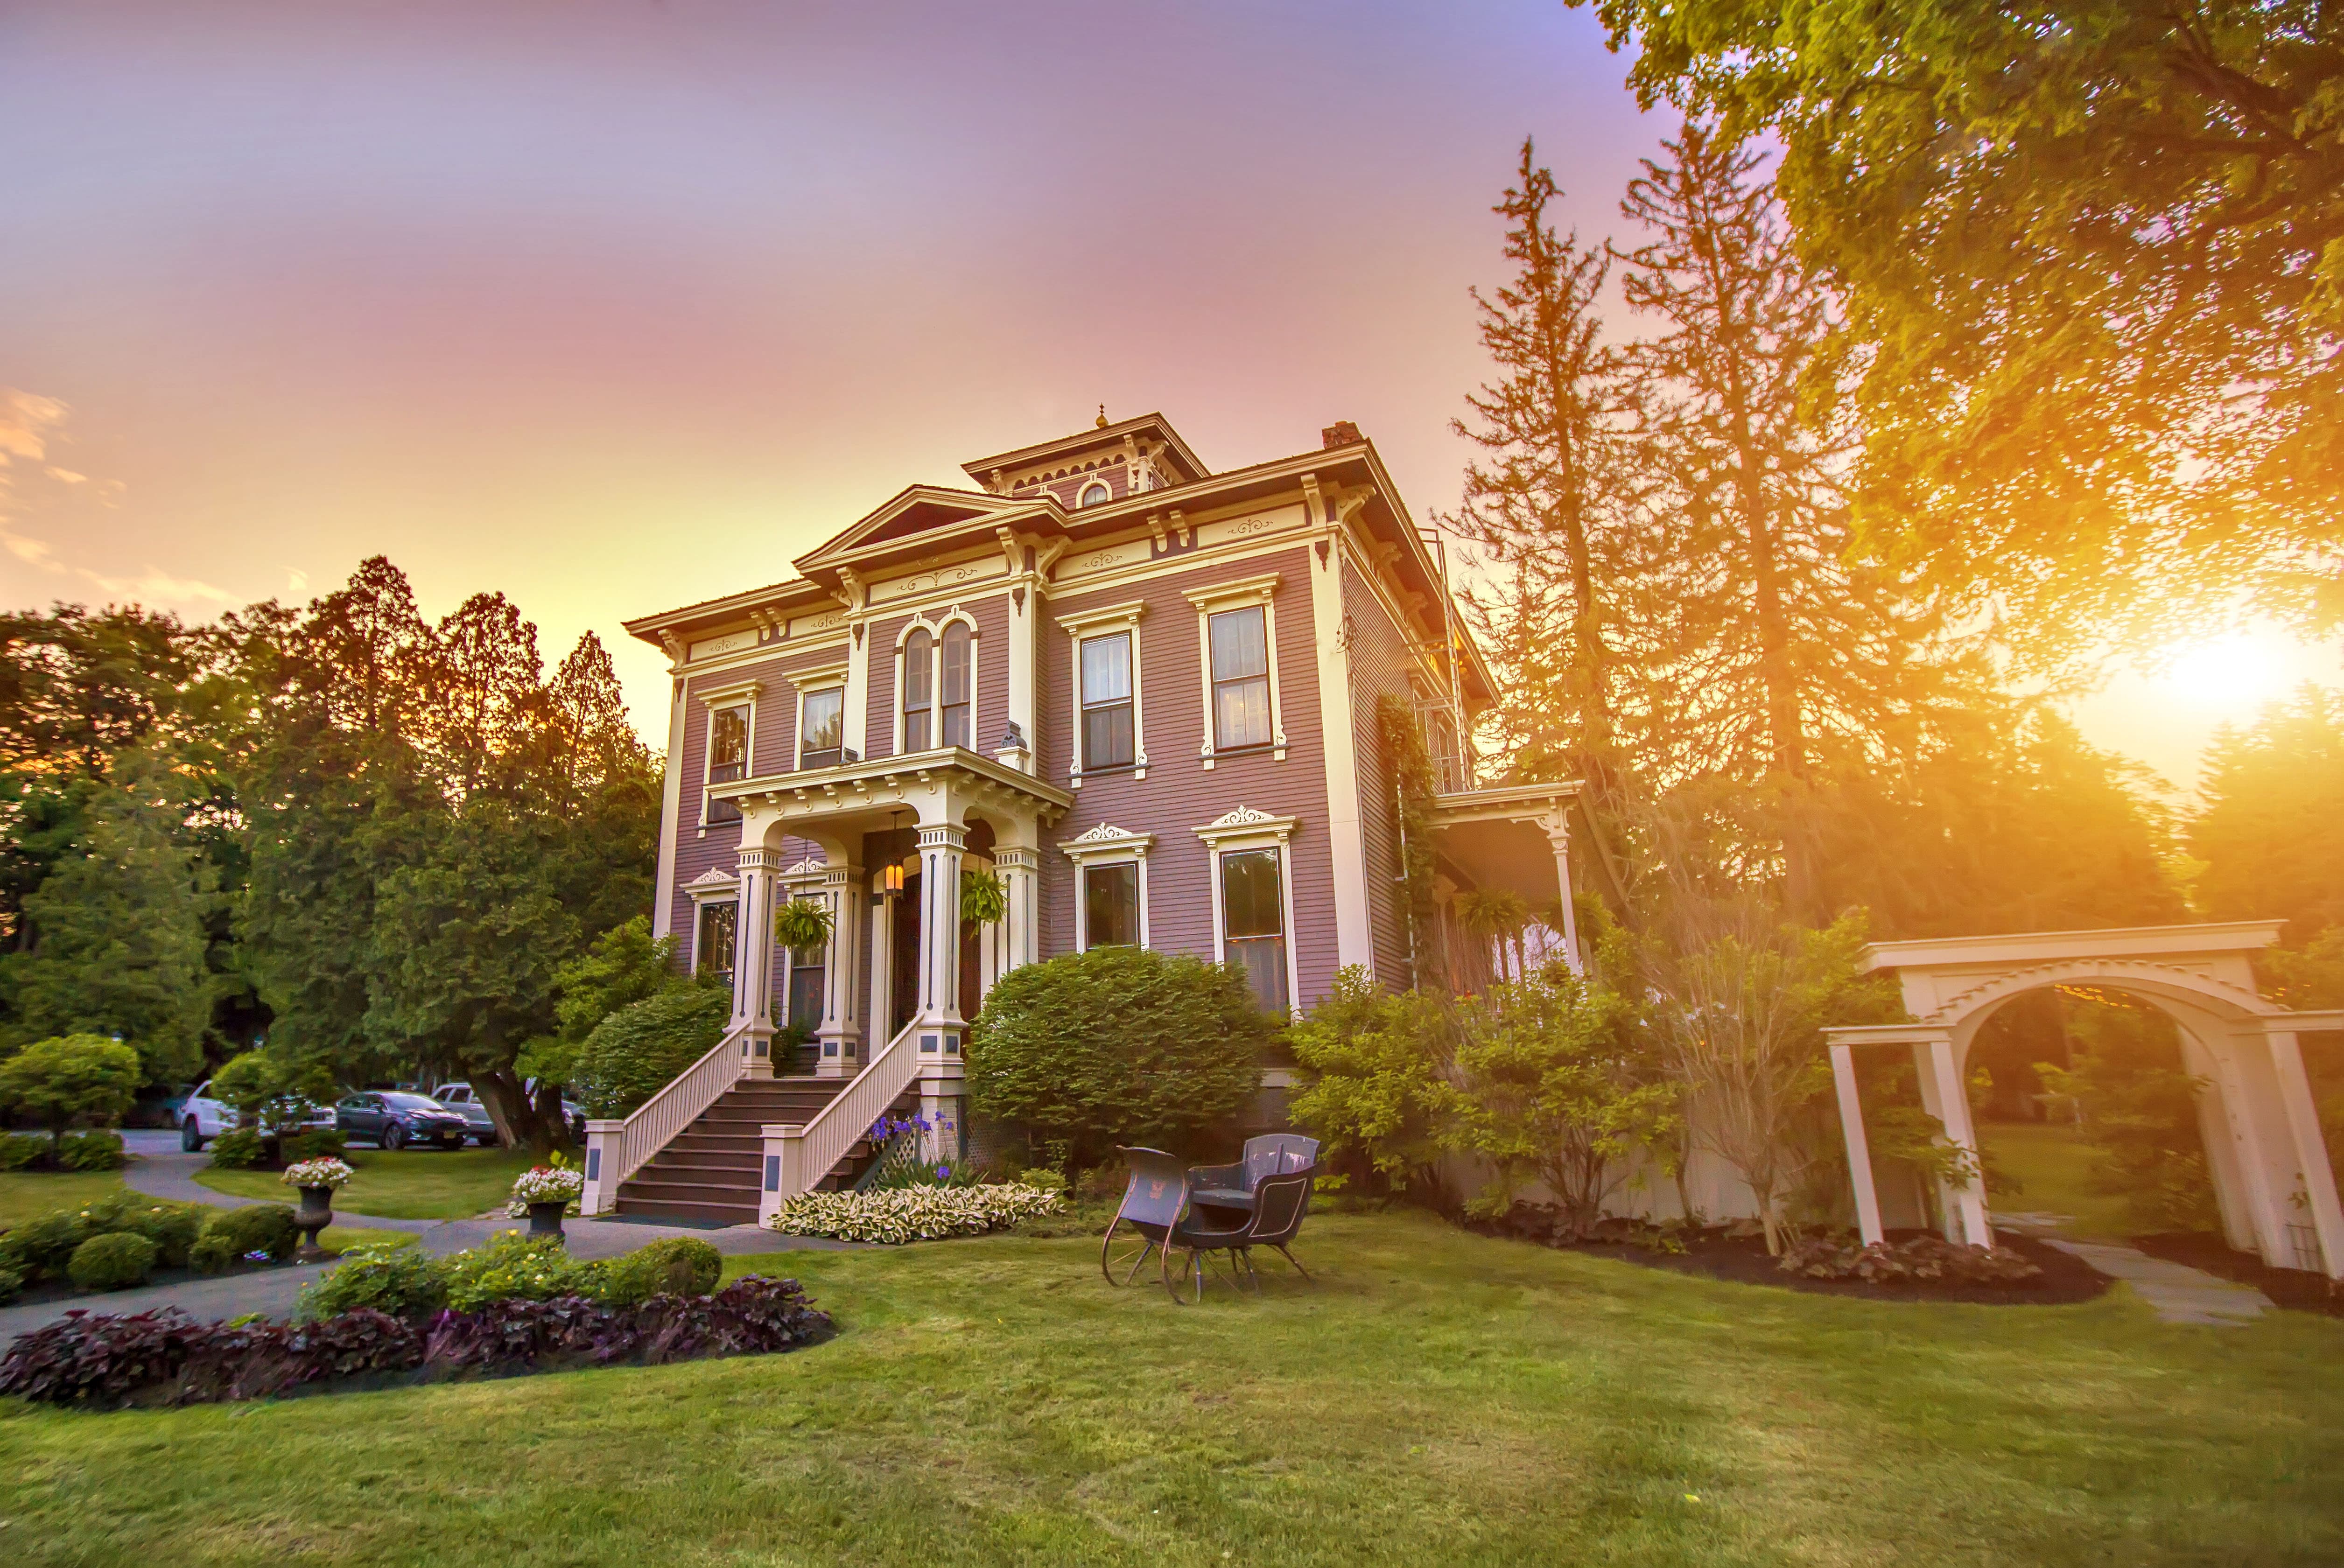 Sunset behind Victorian mansion with green lawn.